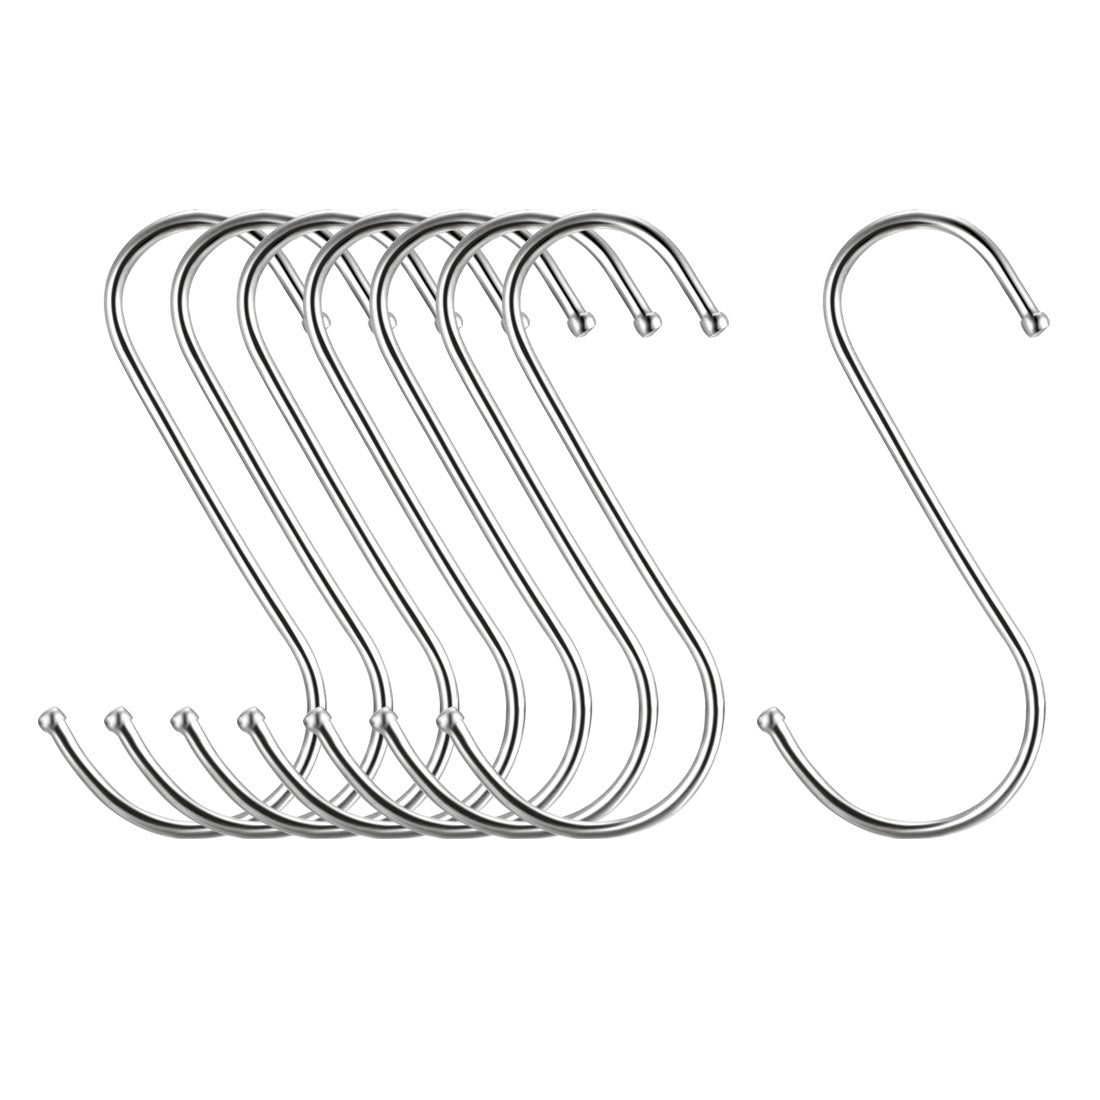 uxcell Uxcell Metal S Hooks 4.72" S Shaped Hook Hangers 8pcs